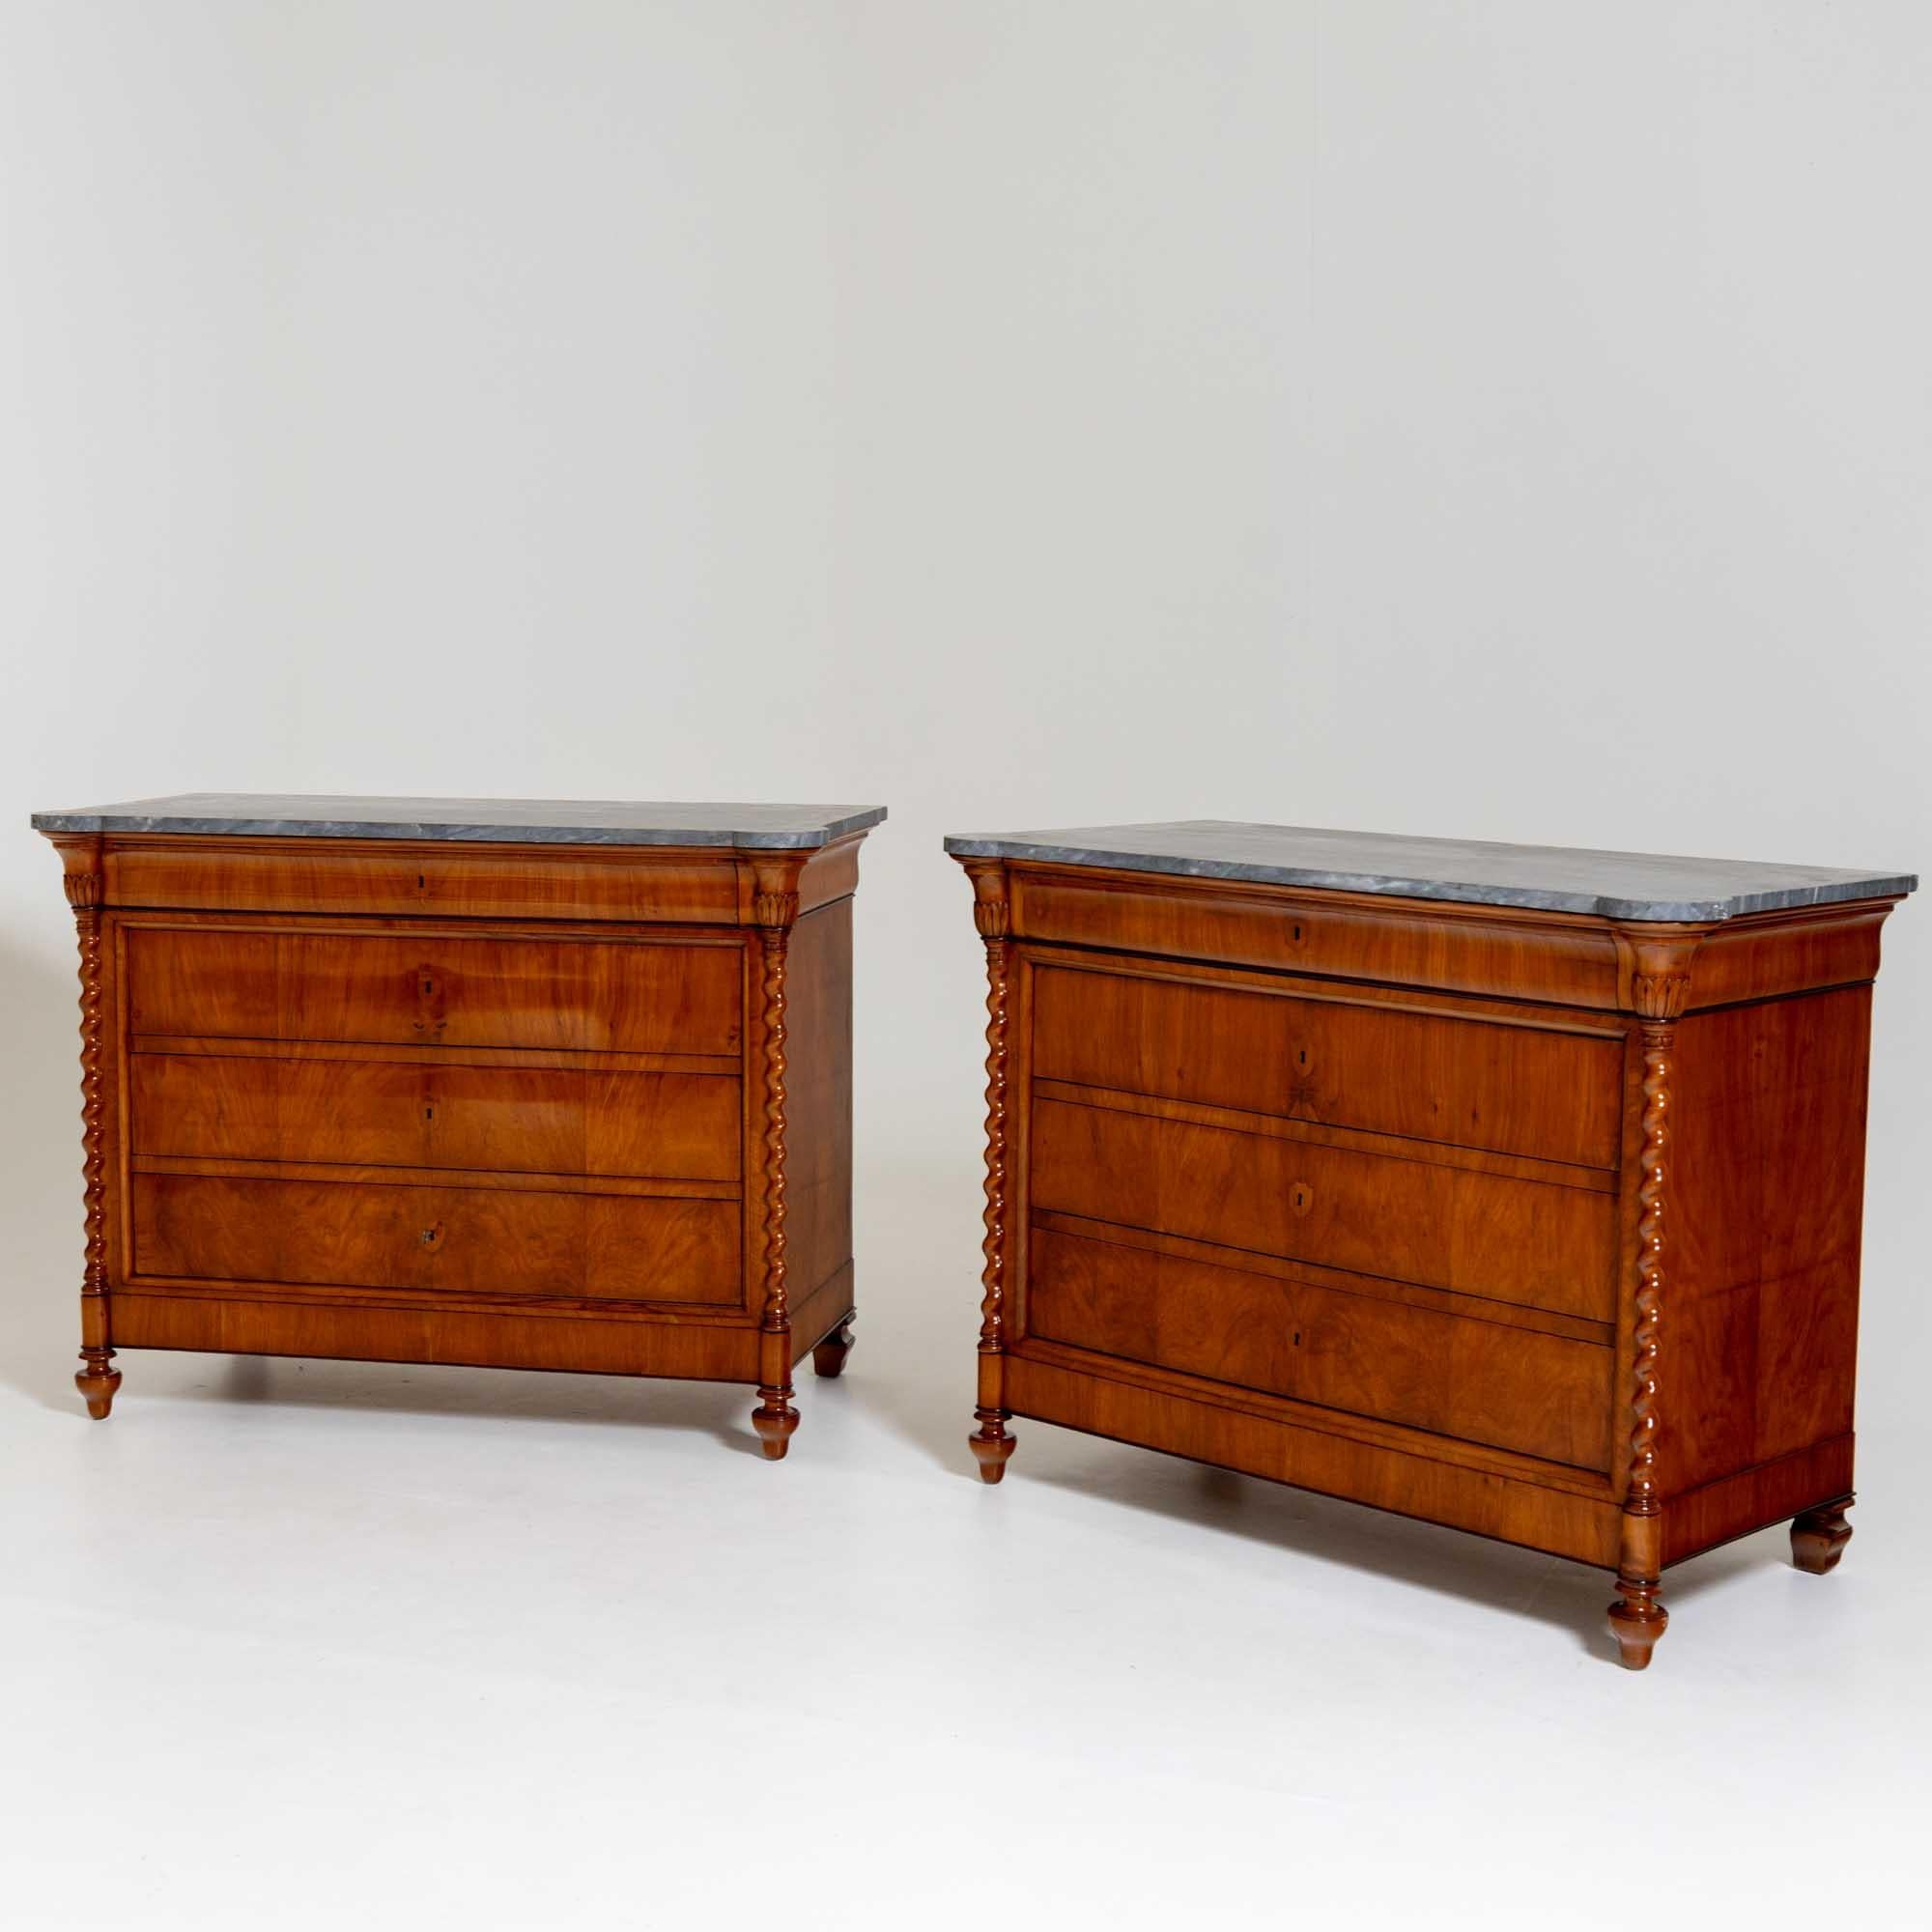 Pair of large chests of drawers in solid and veneered cherry wood with grey stone tops. The chests stand on baluster feet that develop into turned columns with leaf capitals, giving the chests a rounded corner solution. The three lower drawers with